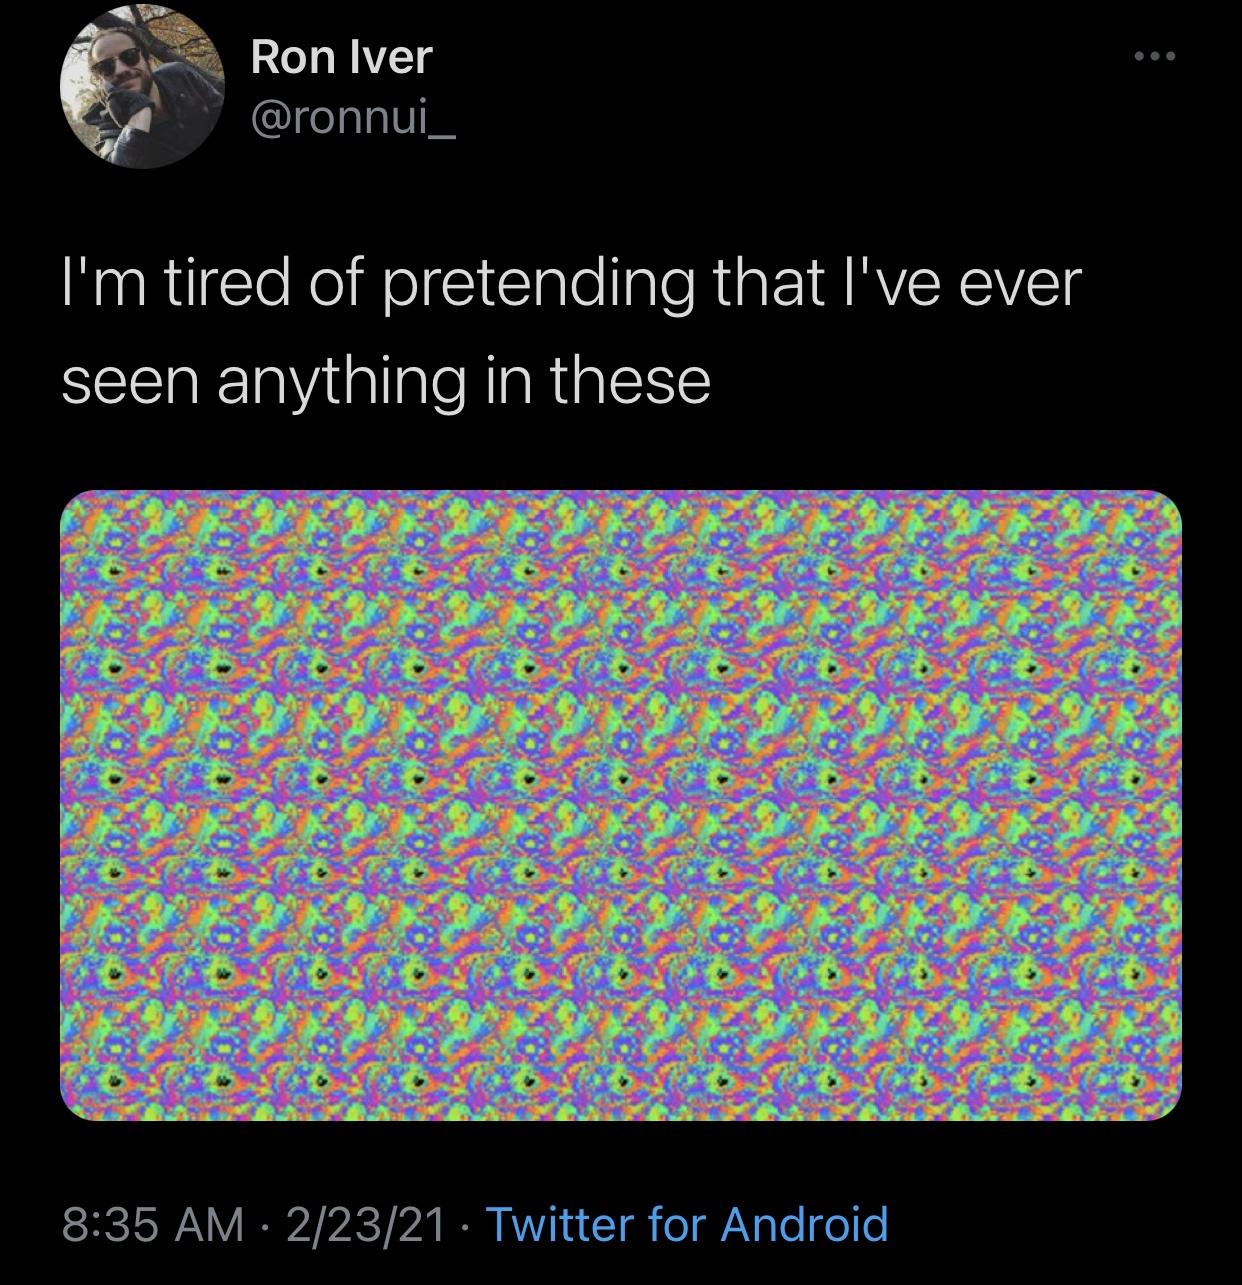 pattern - Ron Iver I'm tired of pretending that I've ever seen anything in these 22321 Twitter for Android